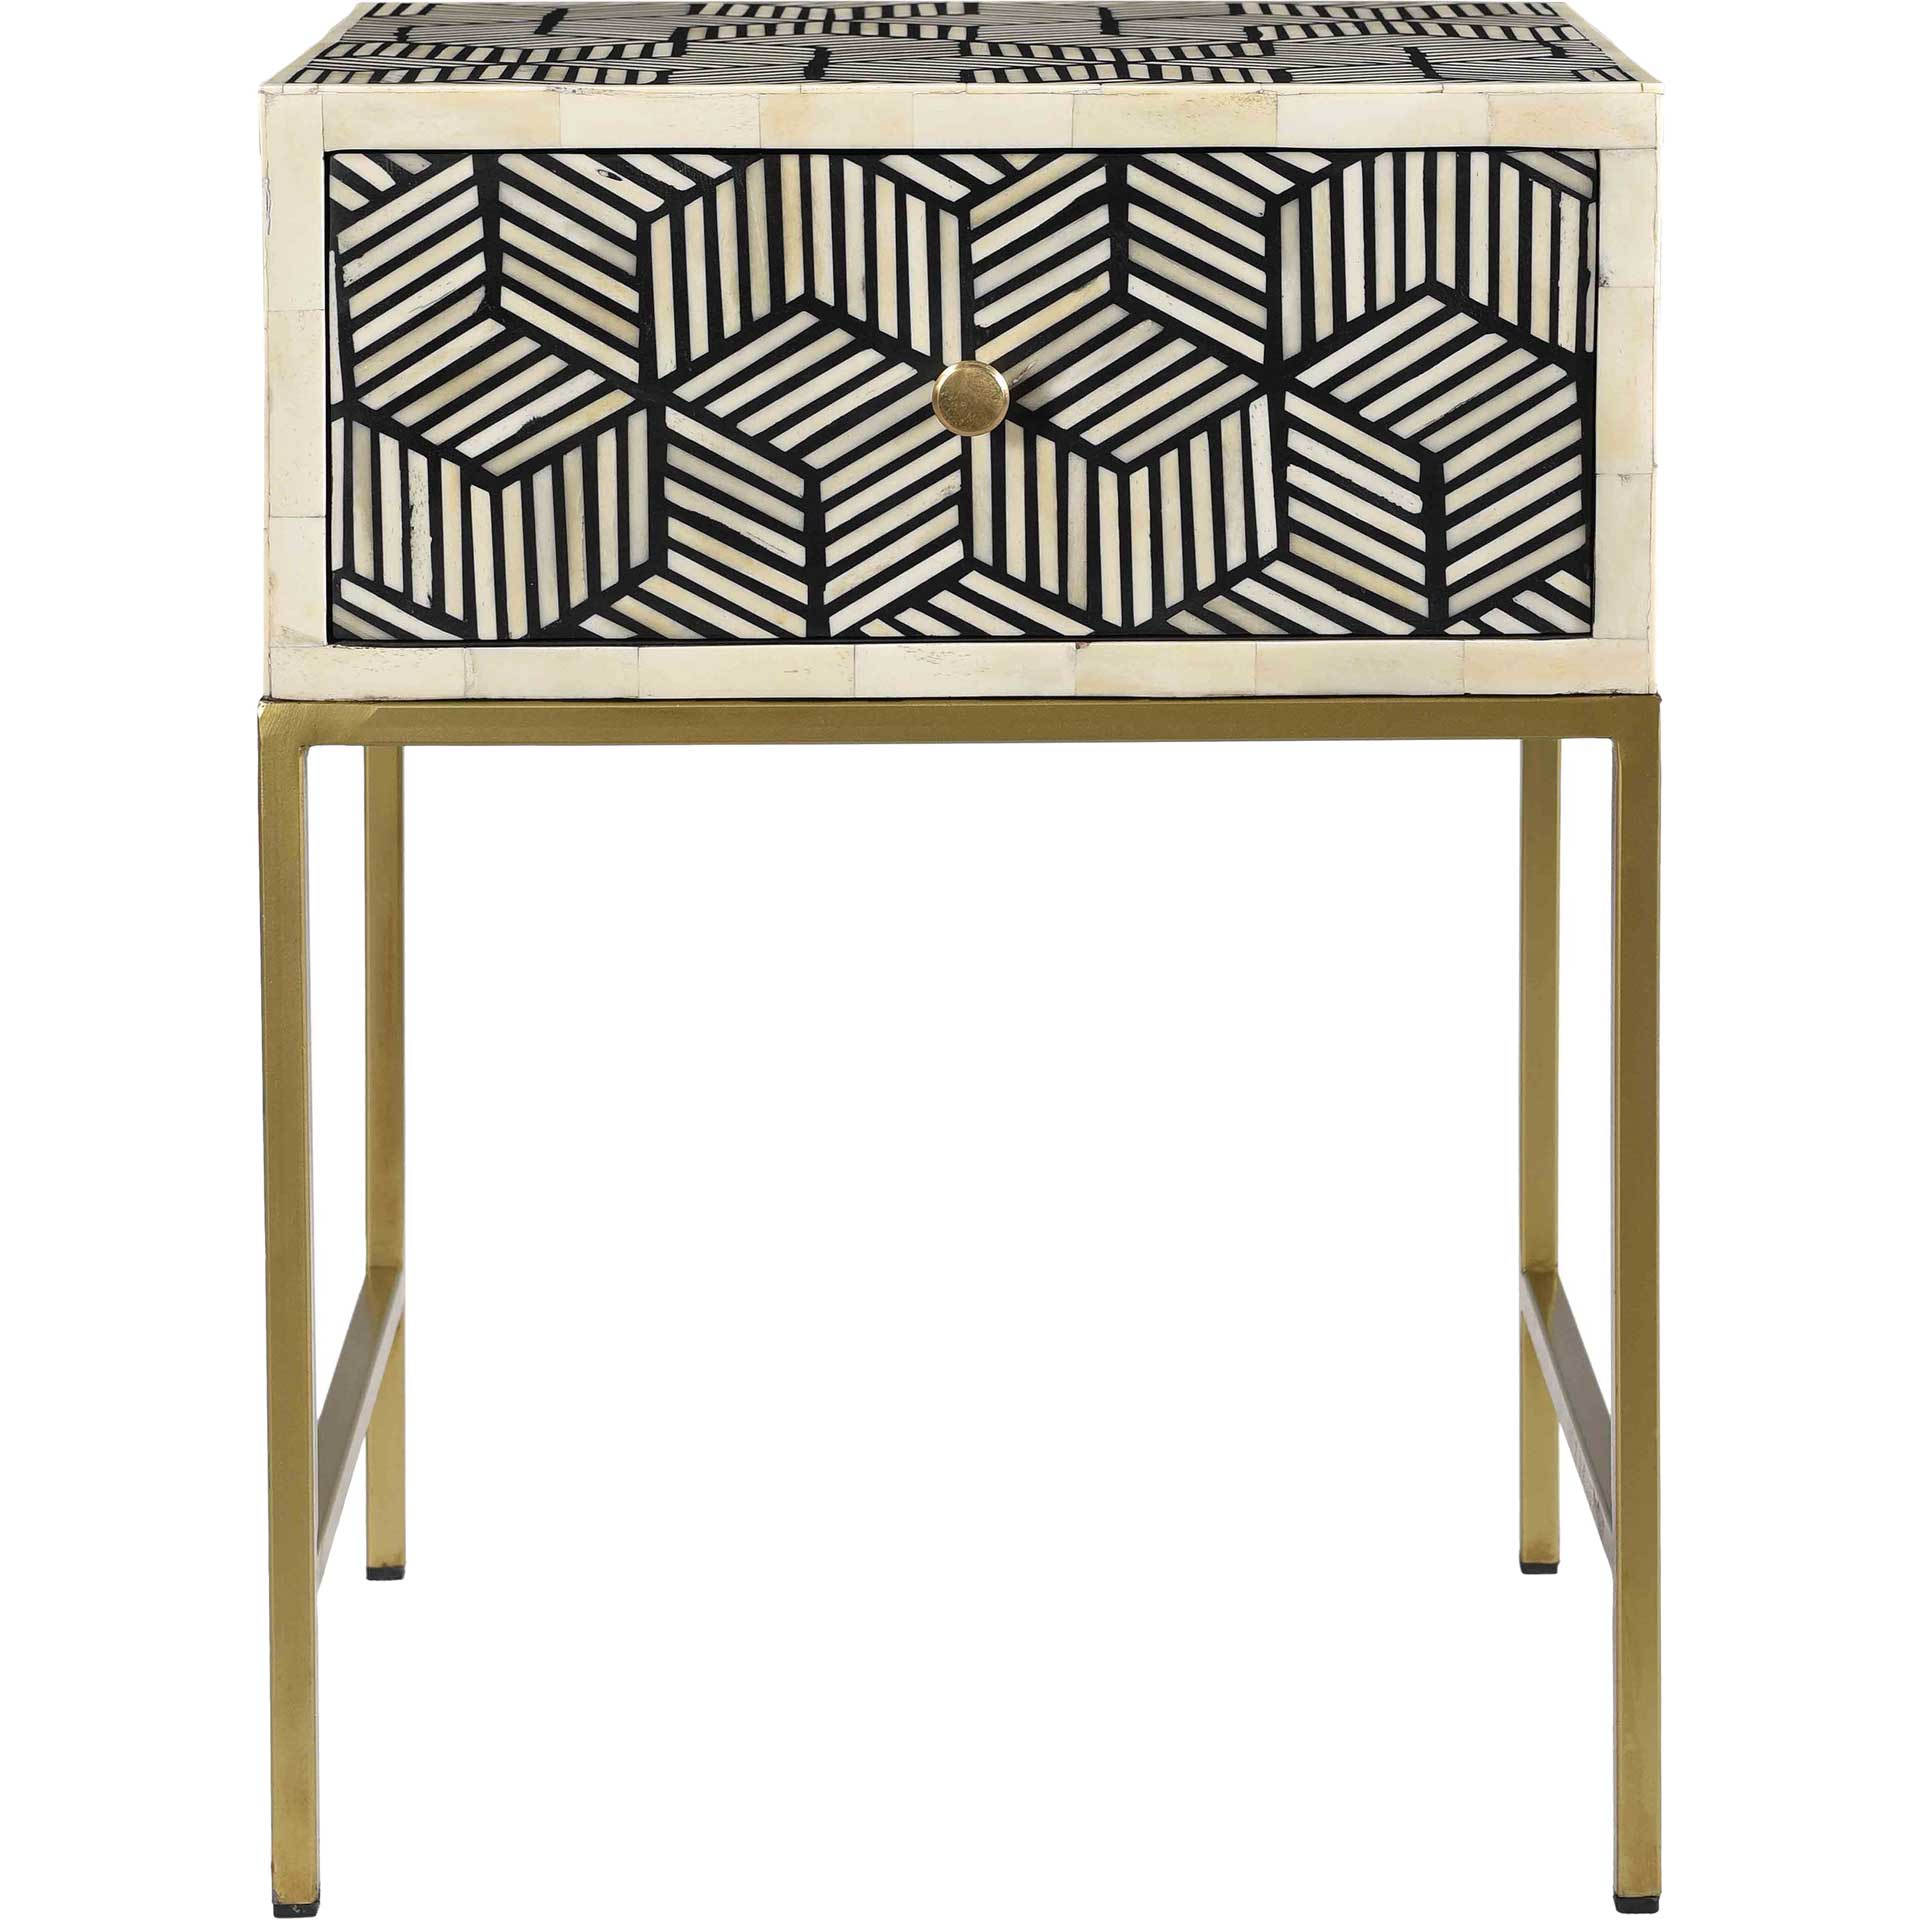 Bone Inlay Side Table Black And White